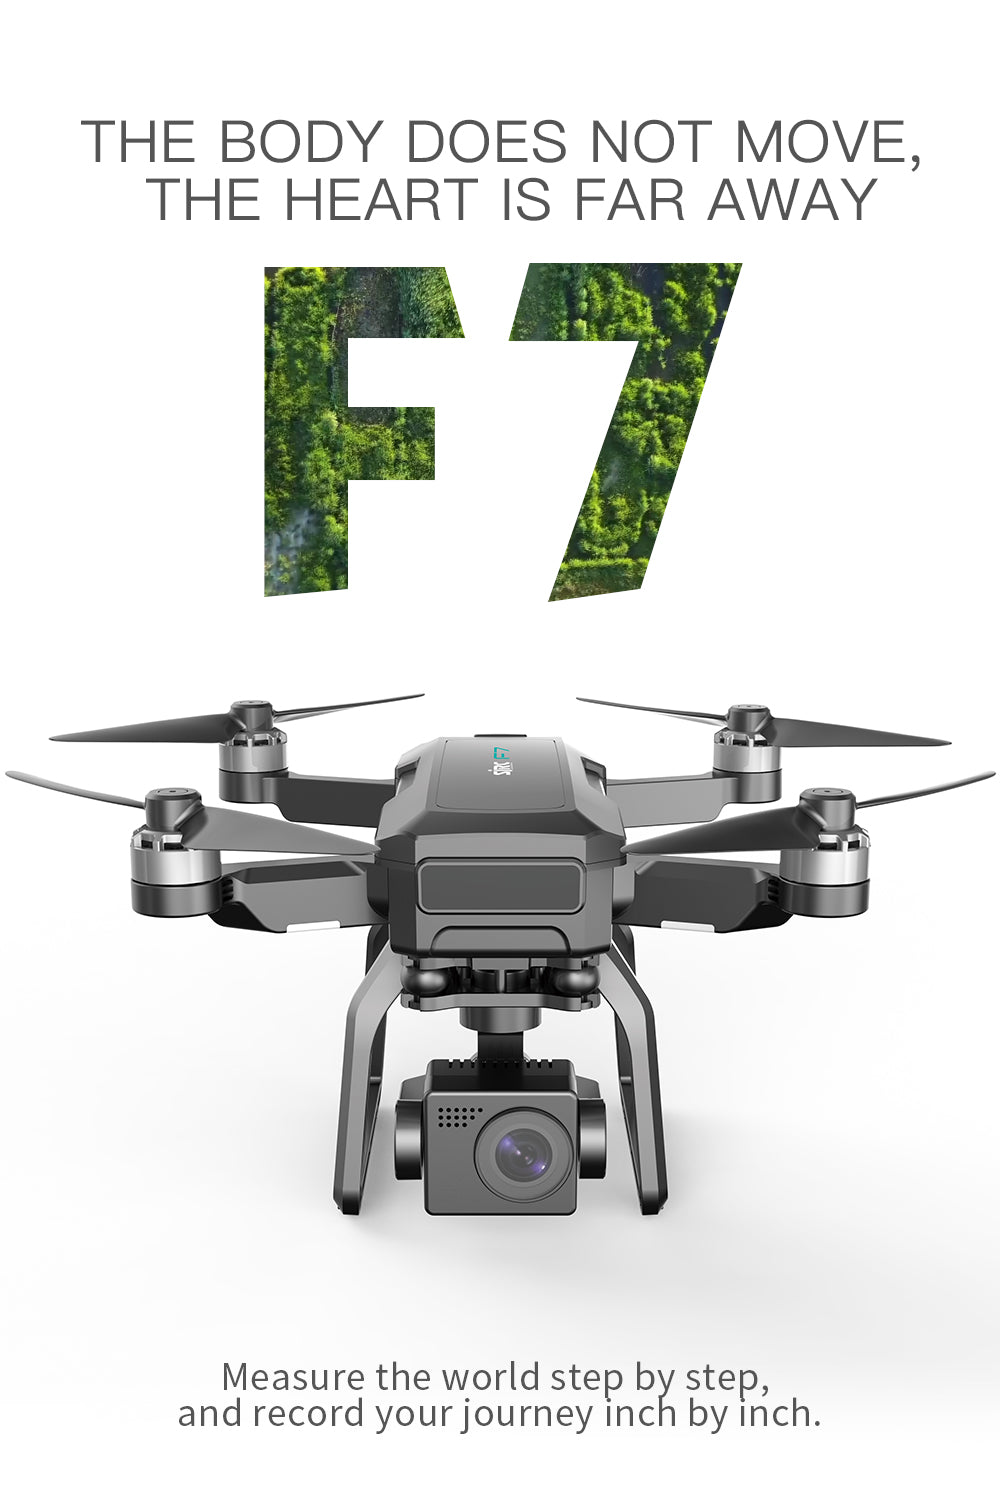 SJRC F7 PRO / F7S Pro Drone, measure the world 'Pek and record your journey by inch: step step .